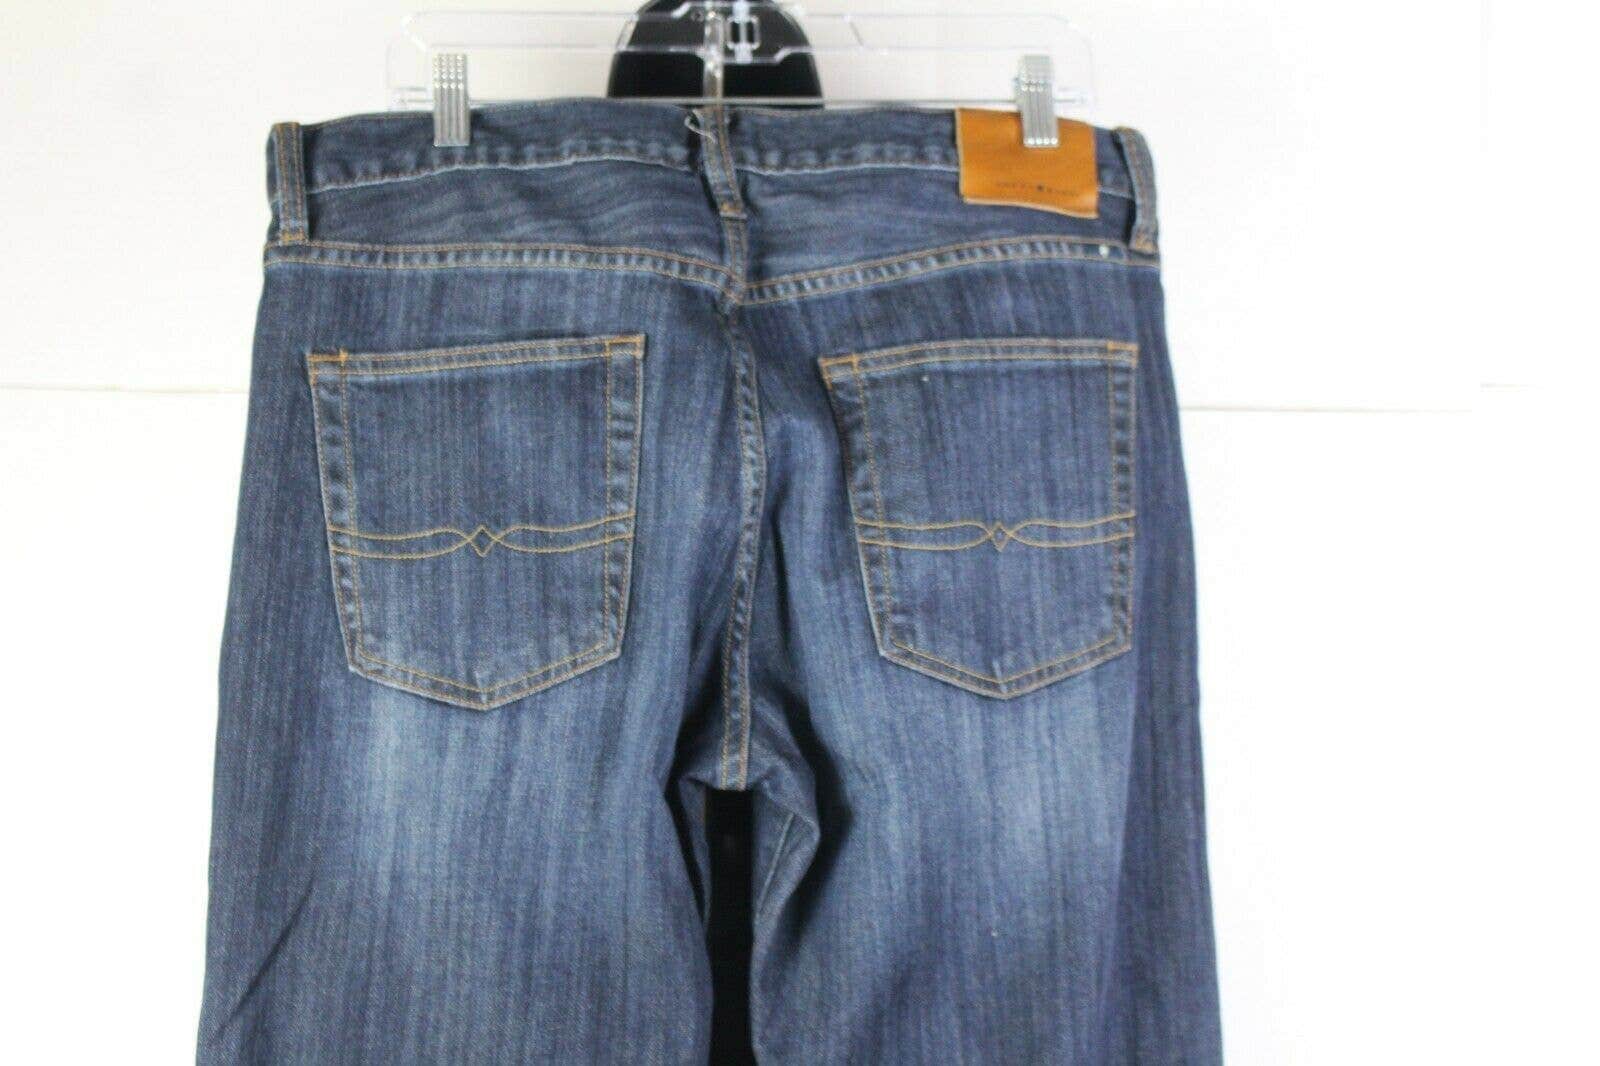 Handcrafted LUCKY BRAND Jeans Size 34W 32L 